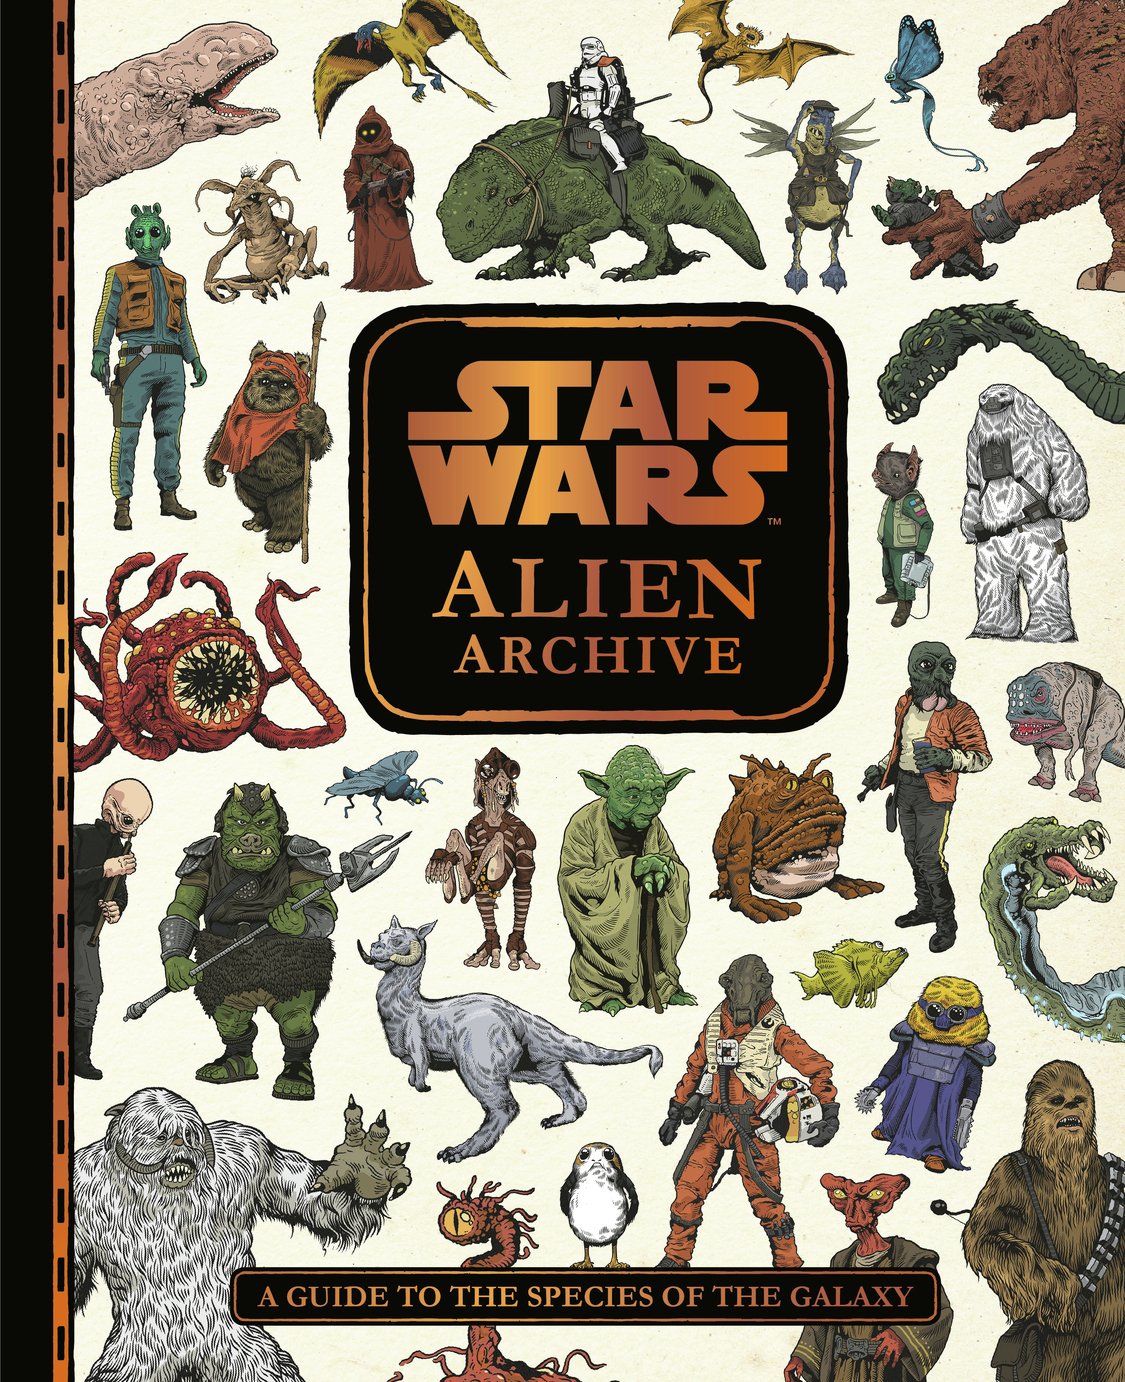 Star Wars Alien Archive: Guide to the Species of the Galaxy